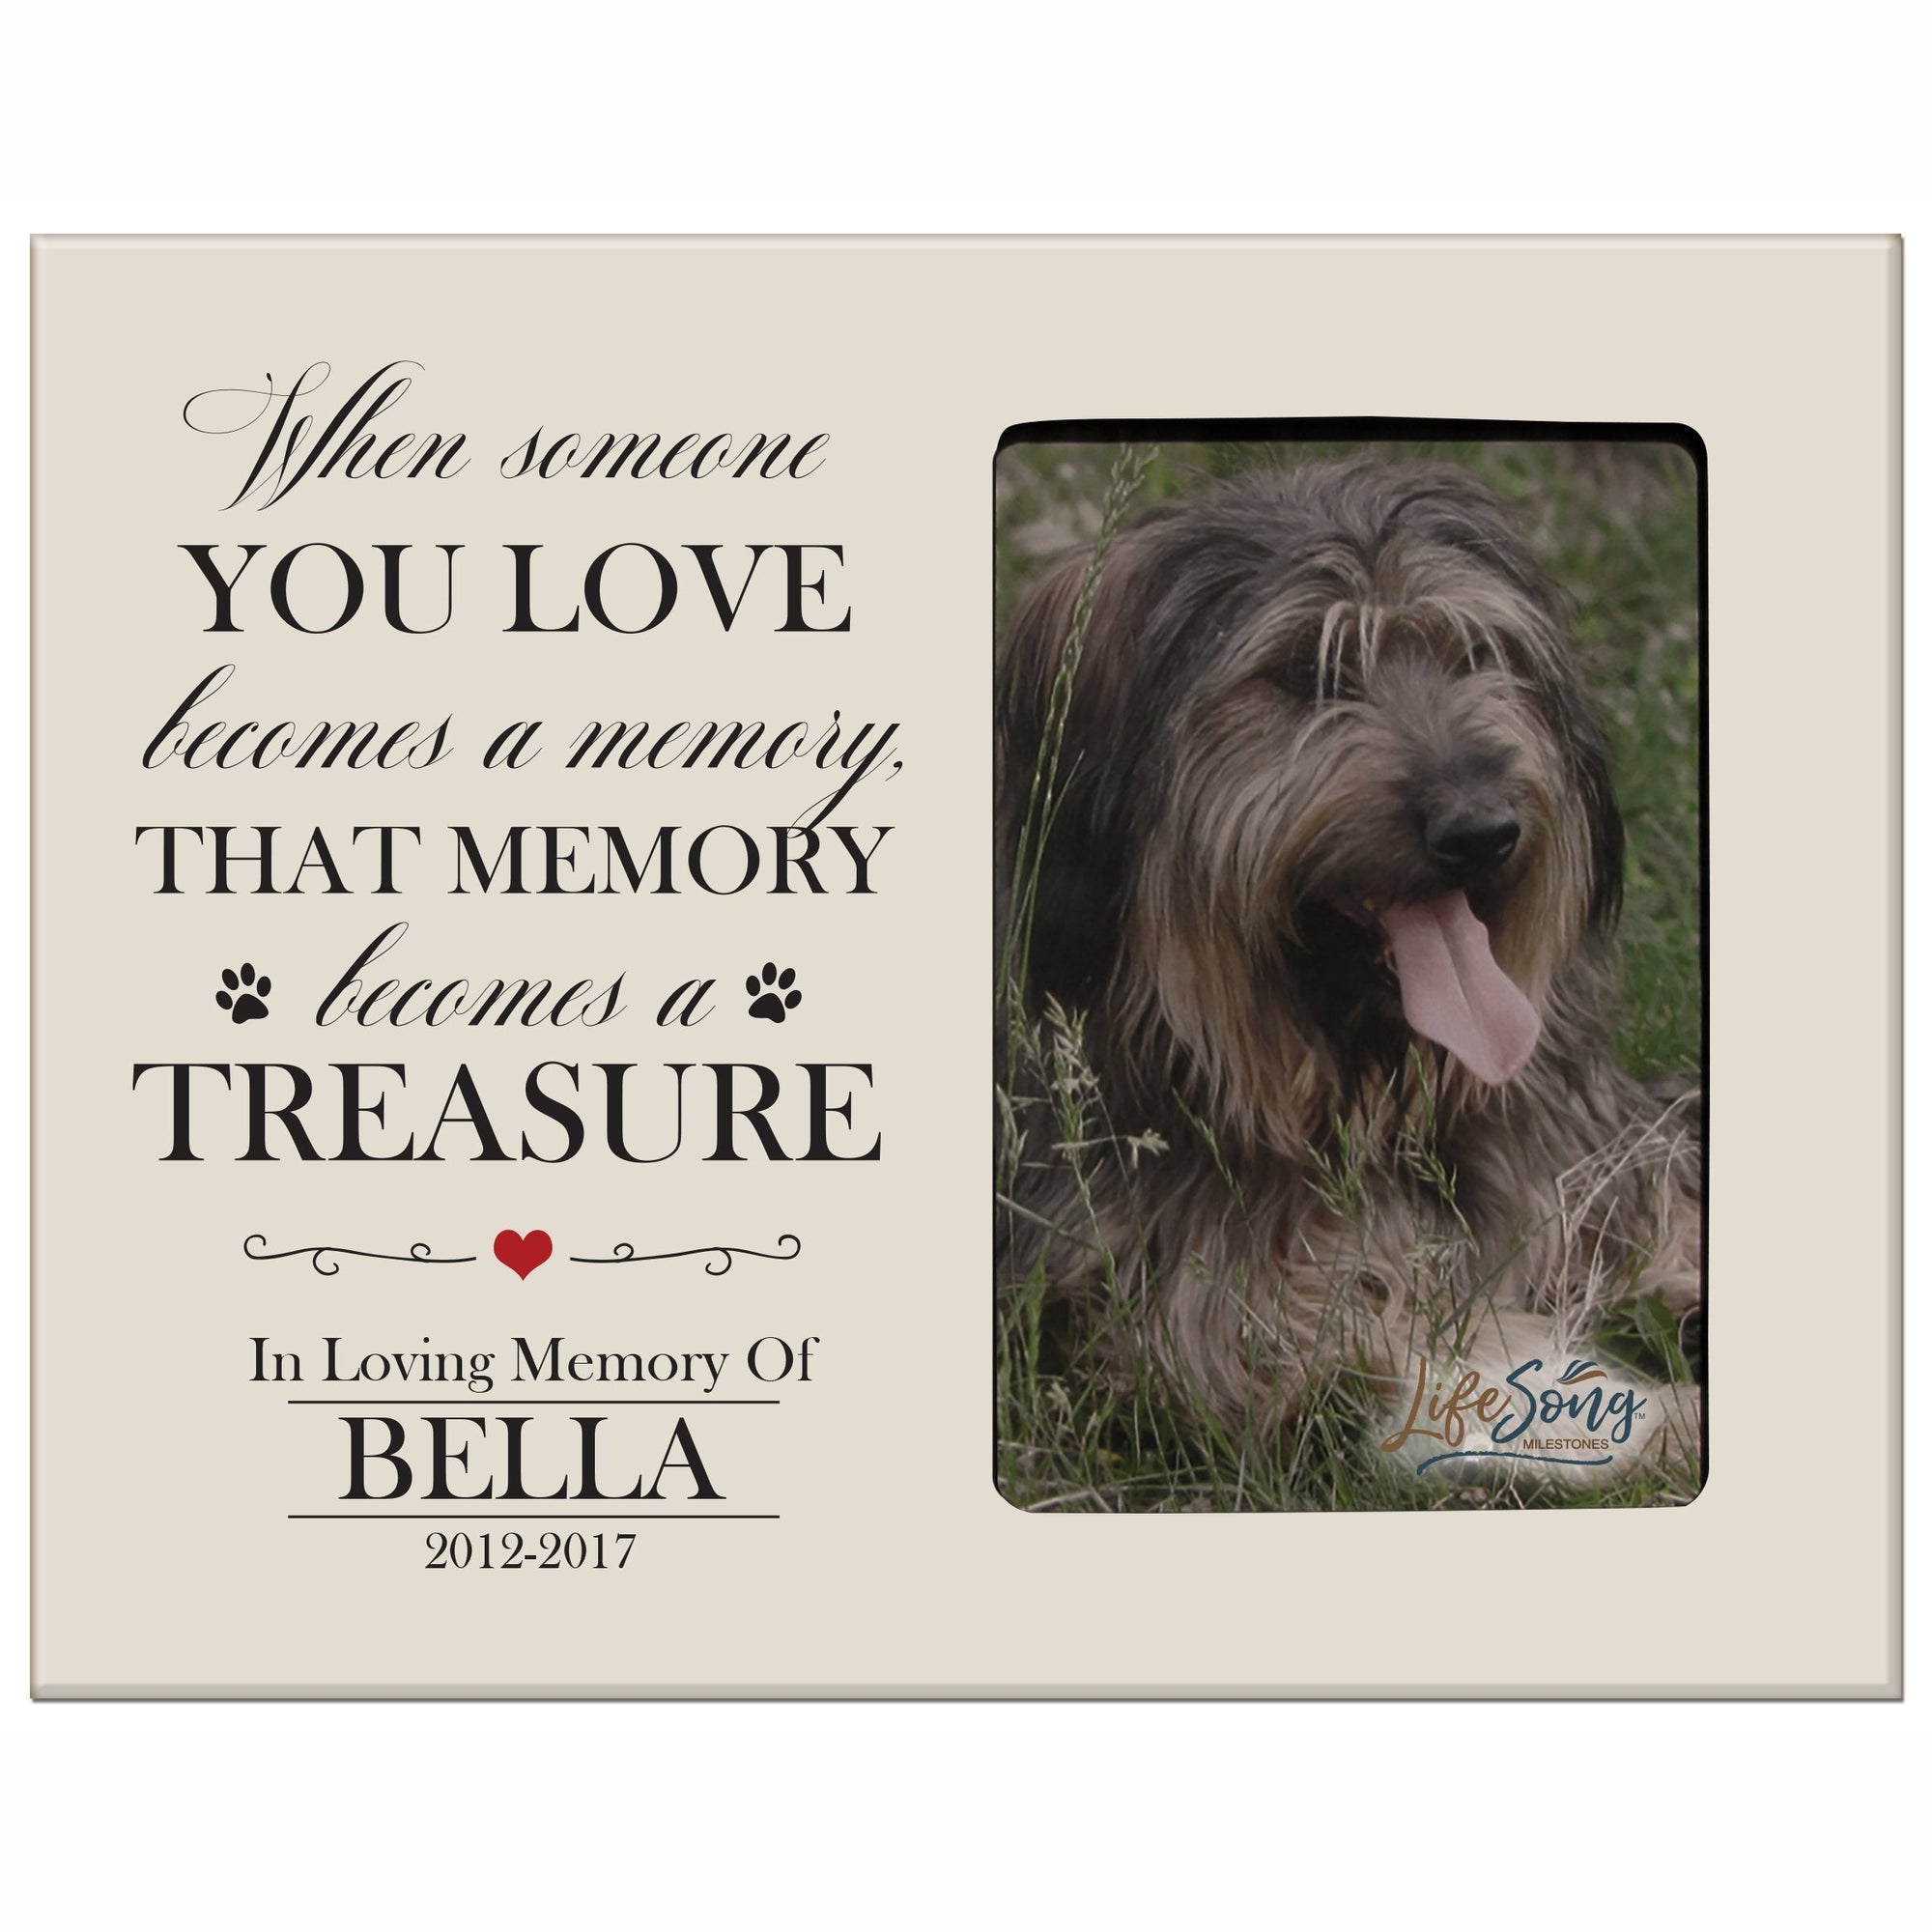 8x10 Ivory Pet Memorial Picture Frame with the phrase "When Someone You Love Becomes A Memory"